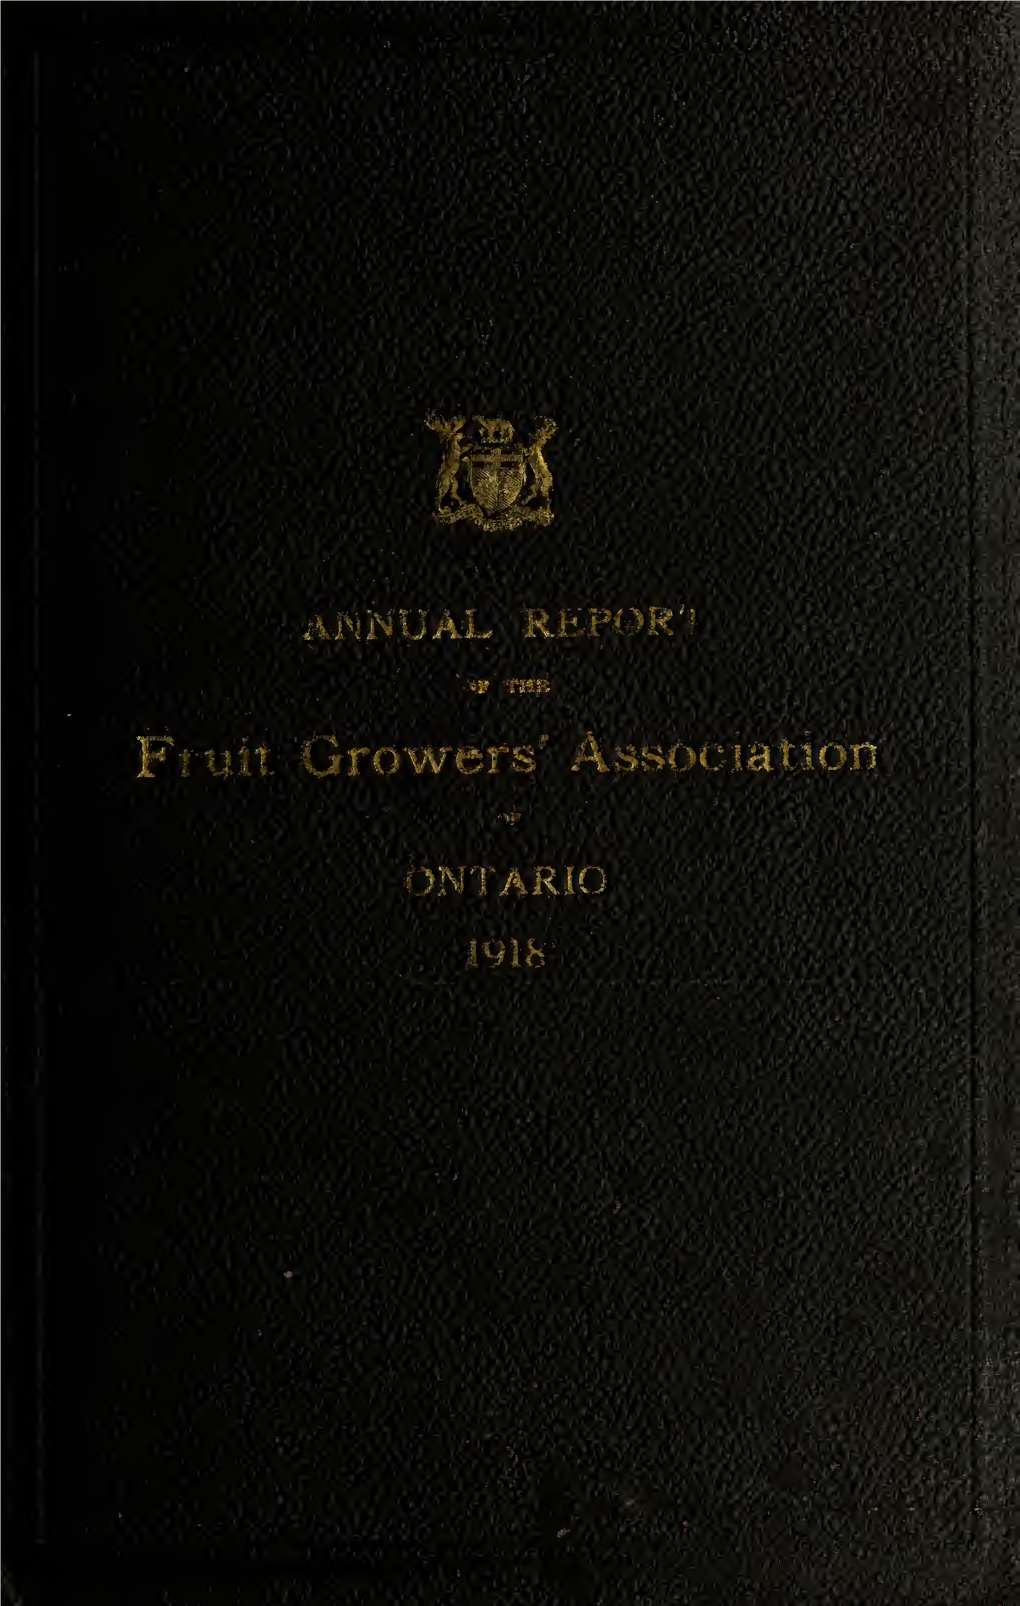 Annual Report of the Fruit Growers' Association of Ontario, 1918